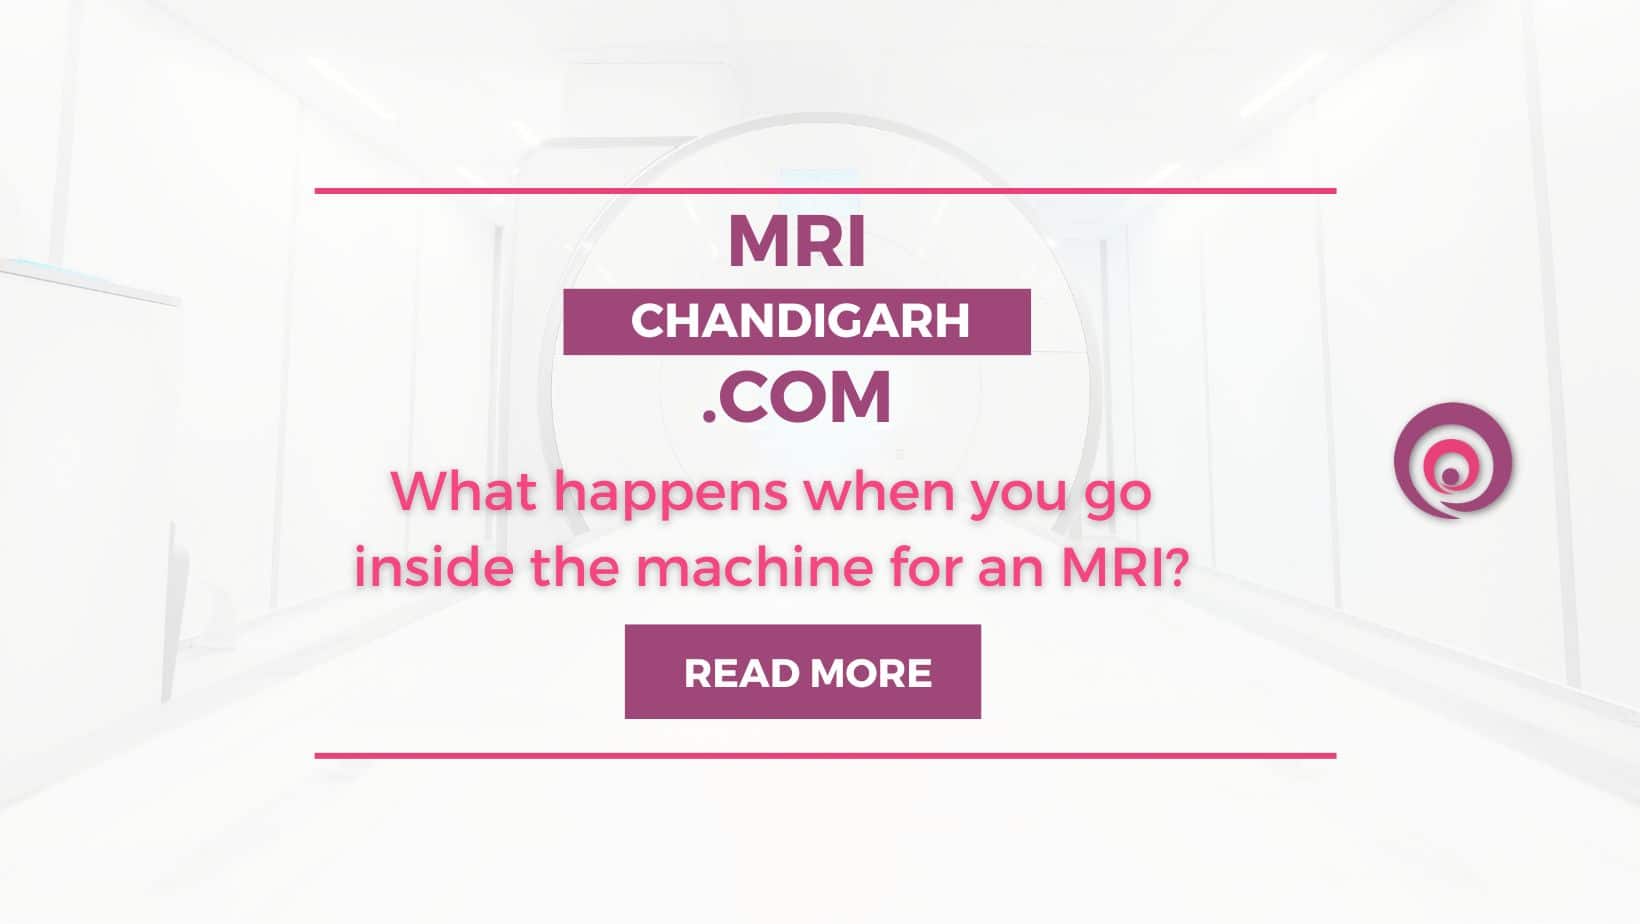 What happens when you go inside the machine for an MRI?